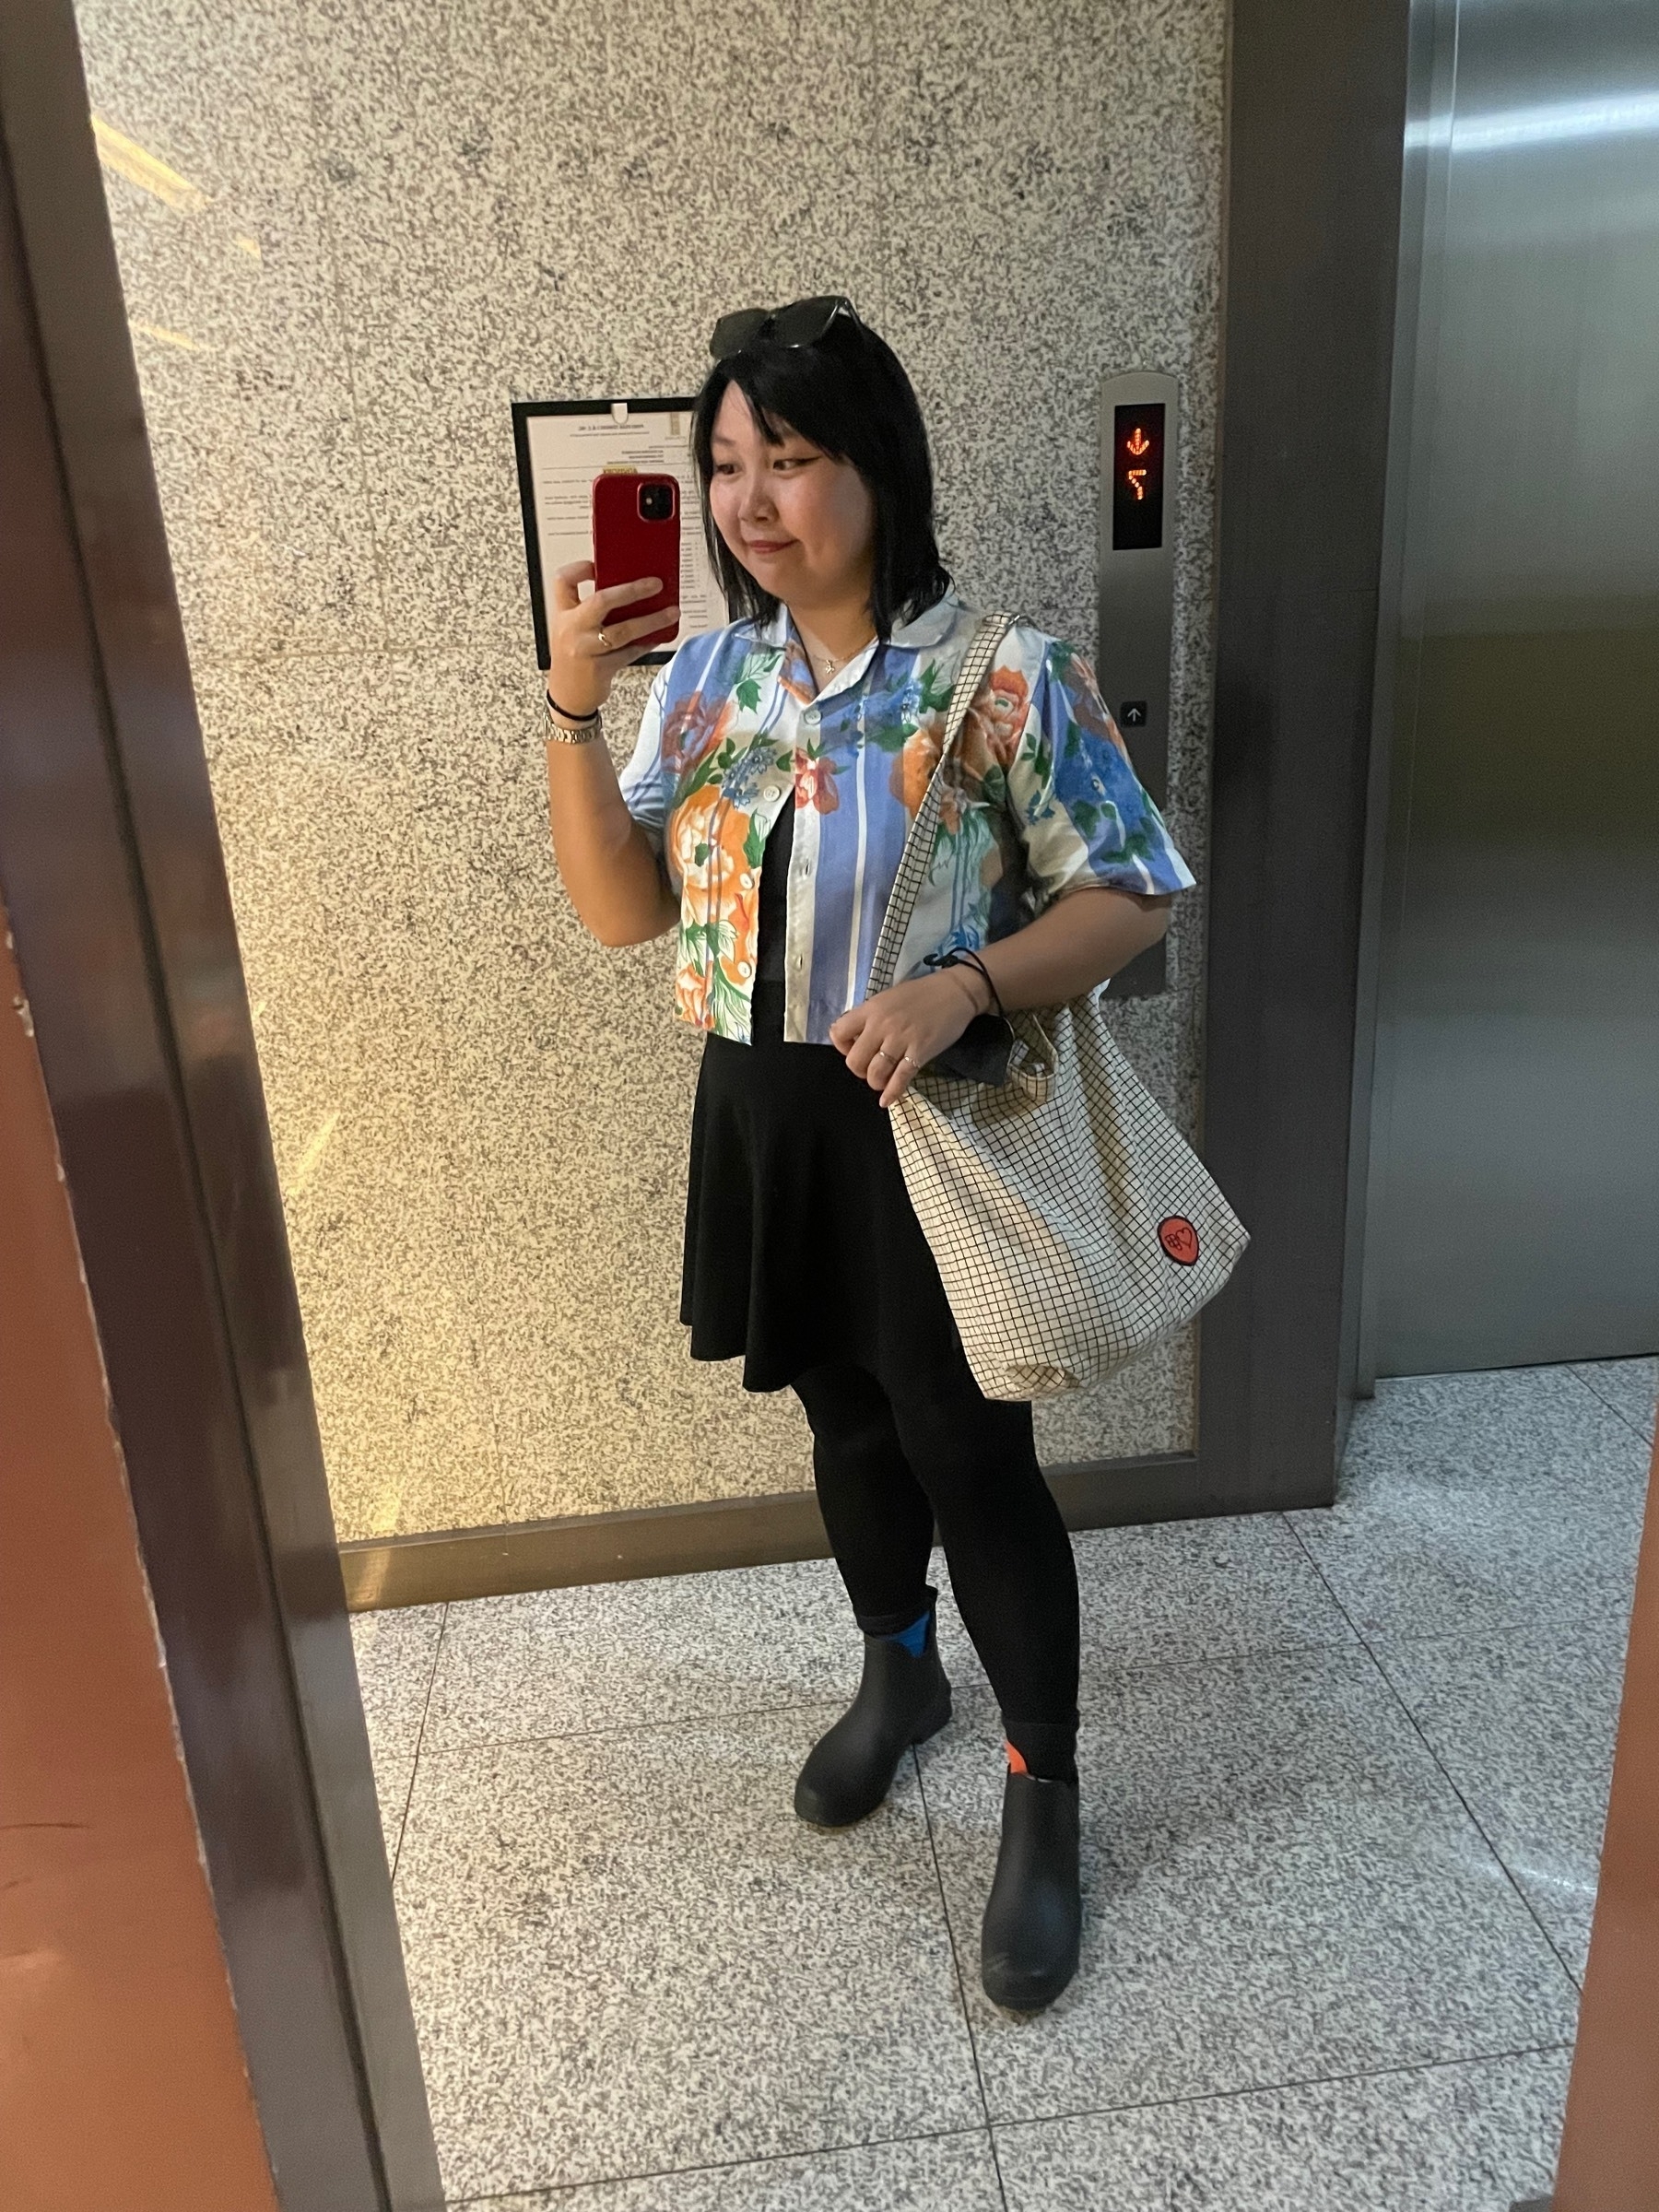 Mirror selfie of Chi wearing a crop top with the pattern of a Filipino blanket, black skater skirt, black leggings, Figma patterned socks and black boots. On her right shoulder is her Friends of Figma black-on-white grid patterned tote bag.